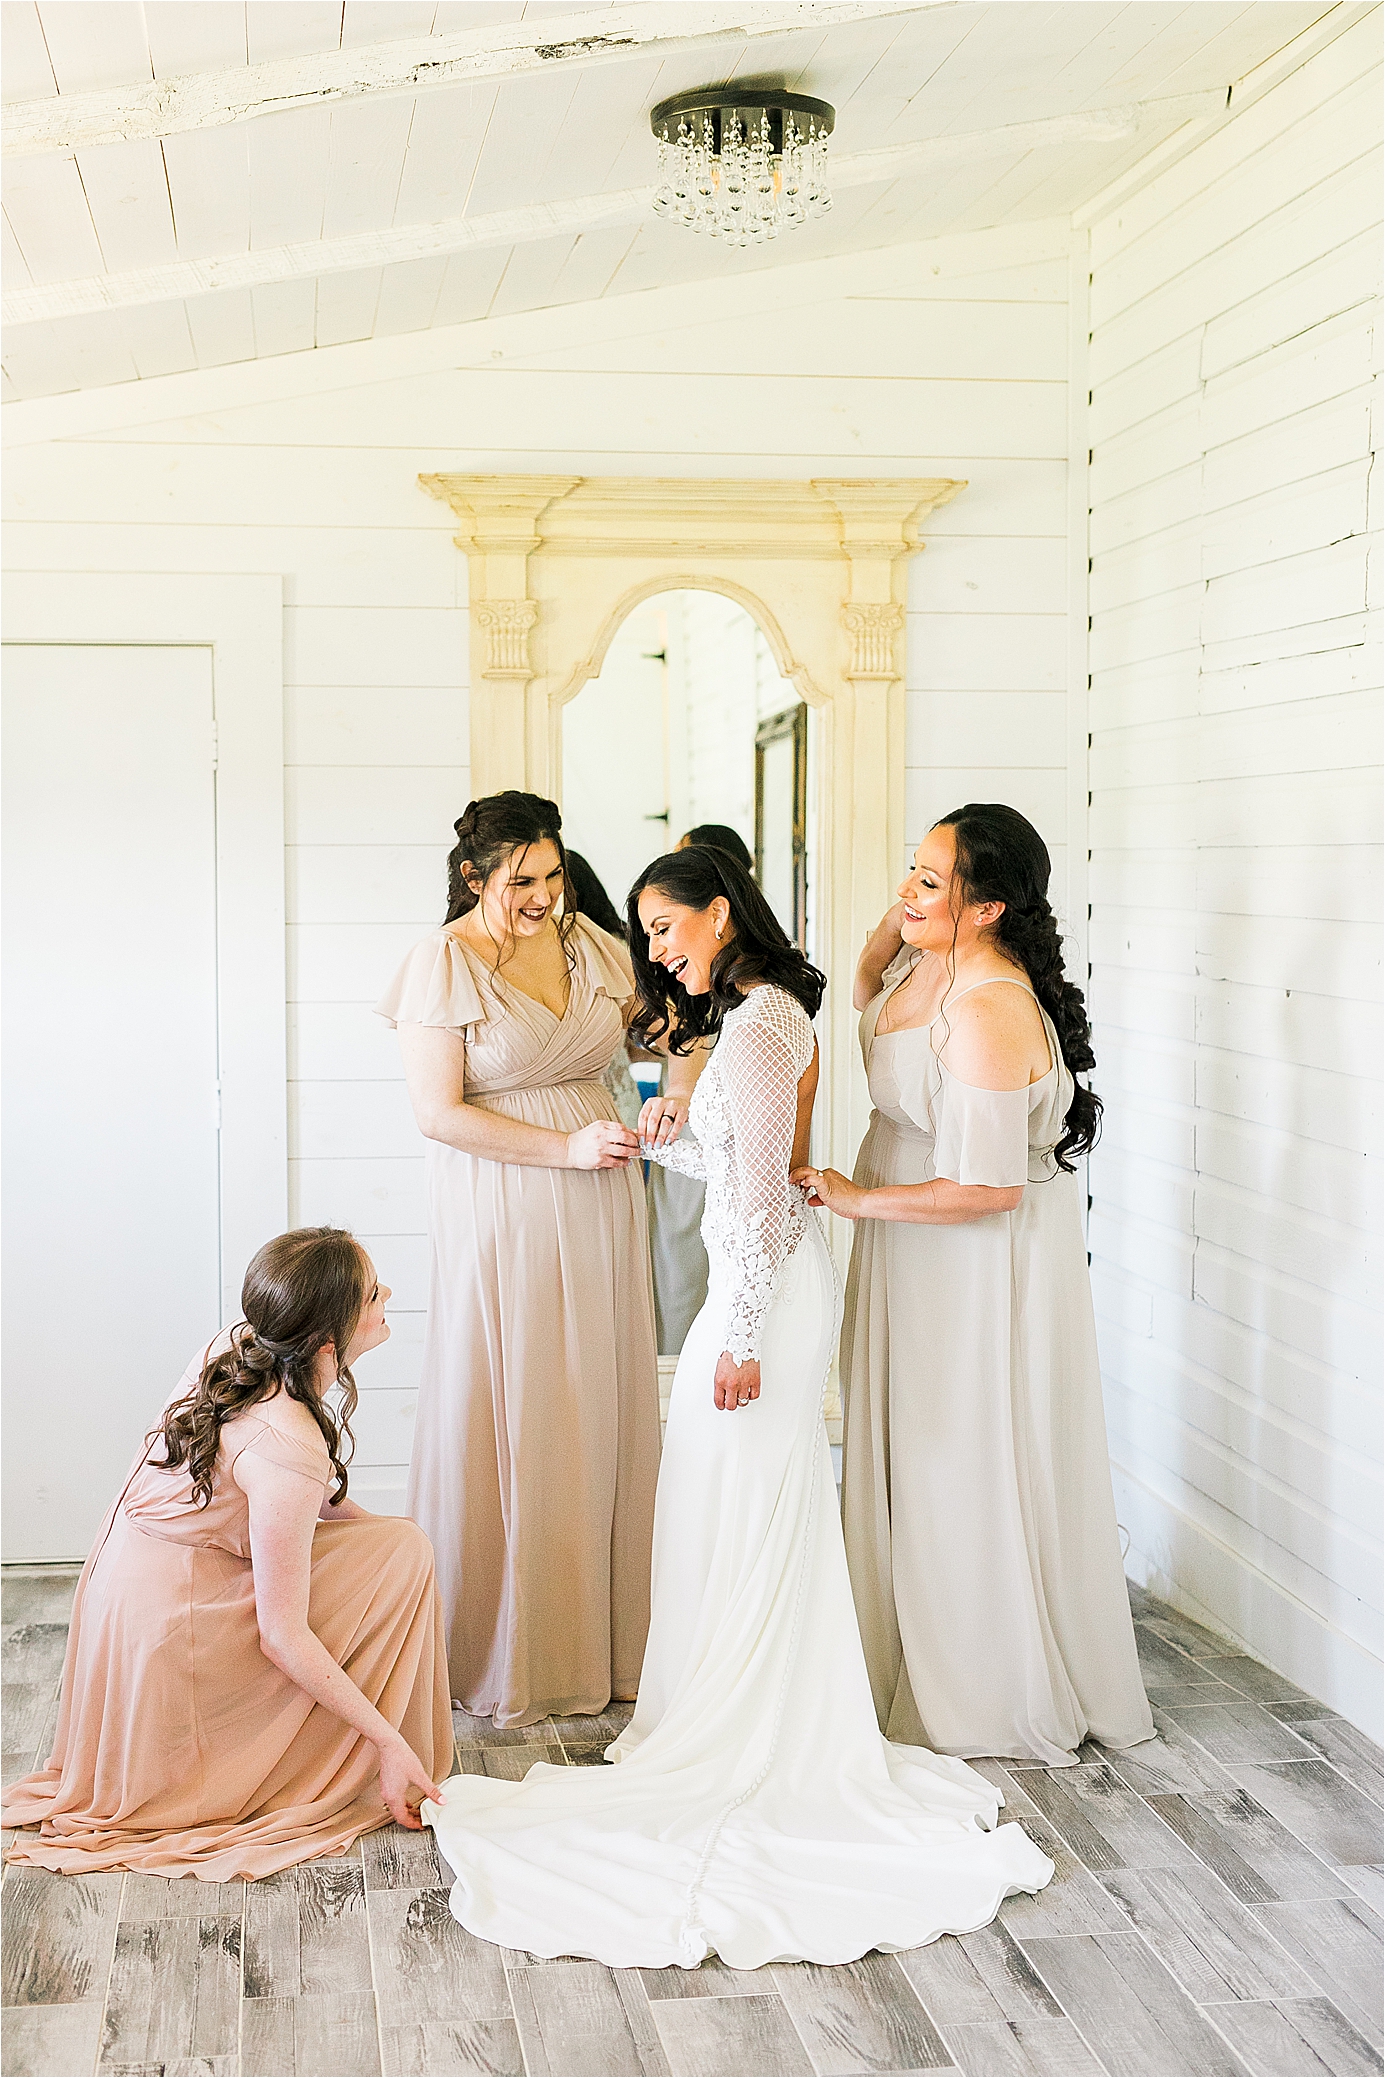 Joy and laughter as a bride puts on her wedding dress with her sisters at her Pineway Farms Wedding in East Texas with Jillian Hogan Photography 